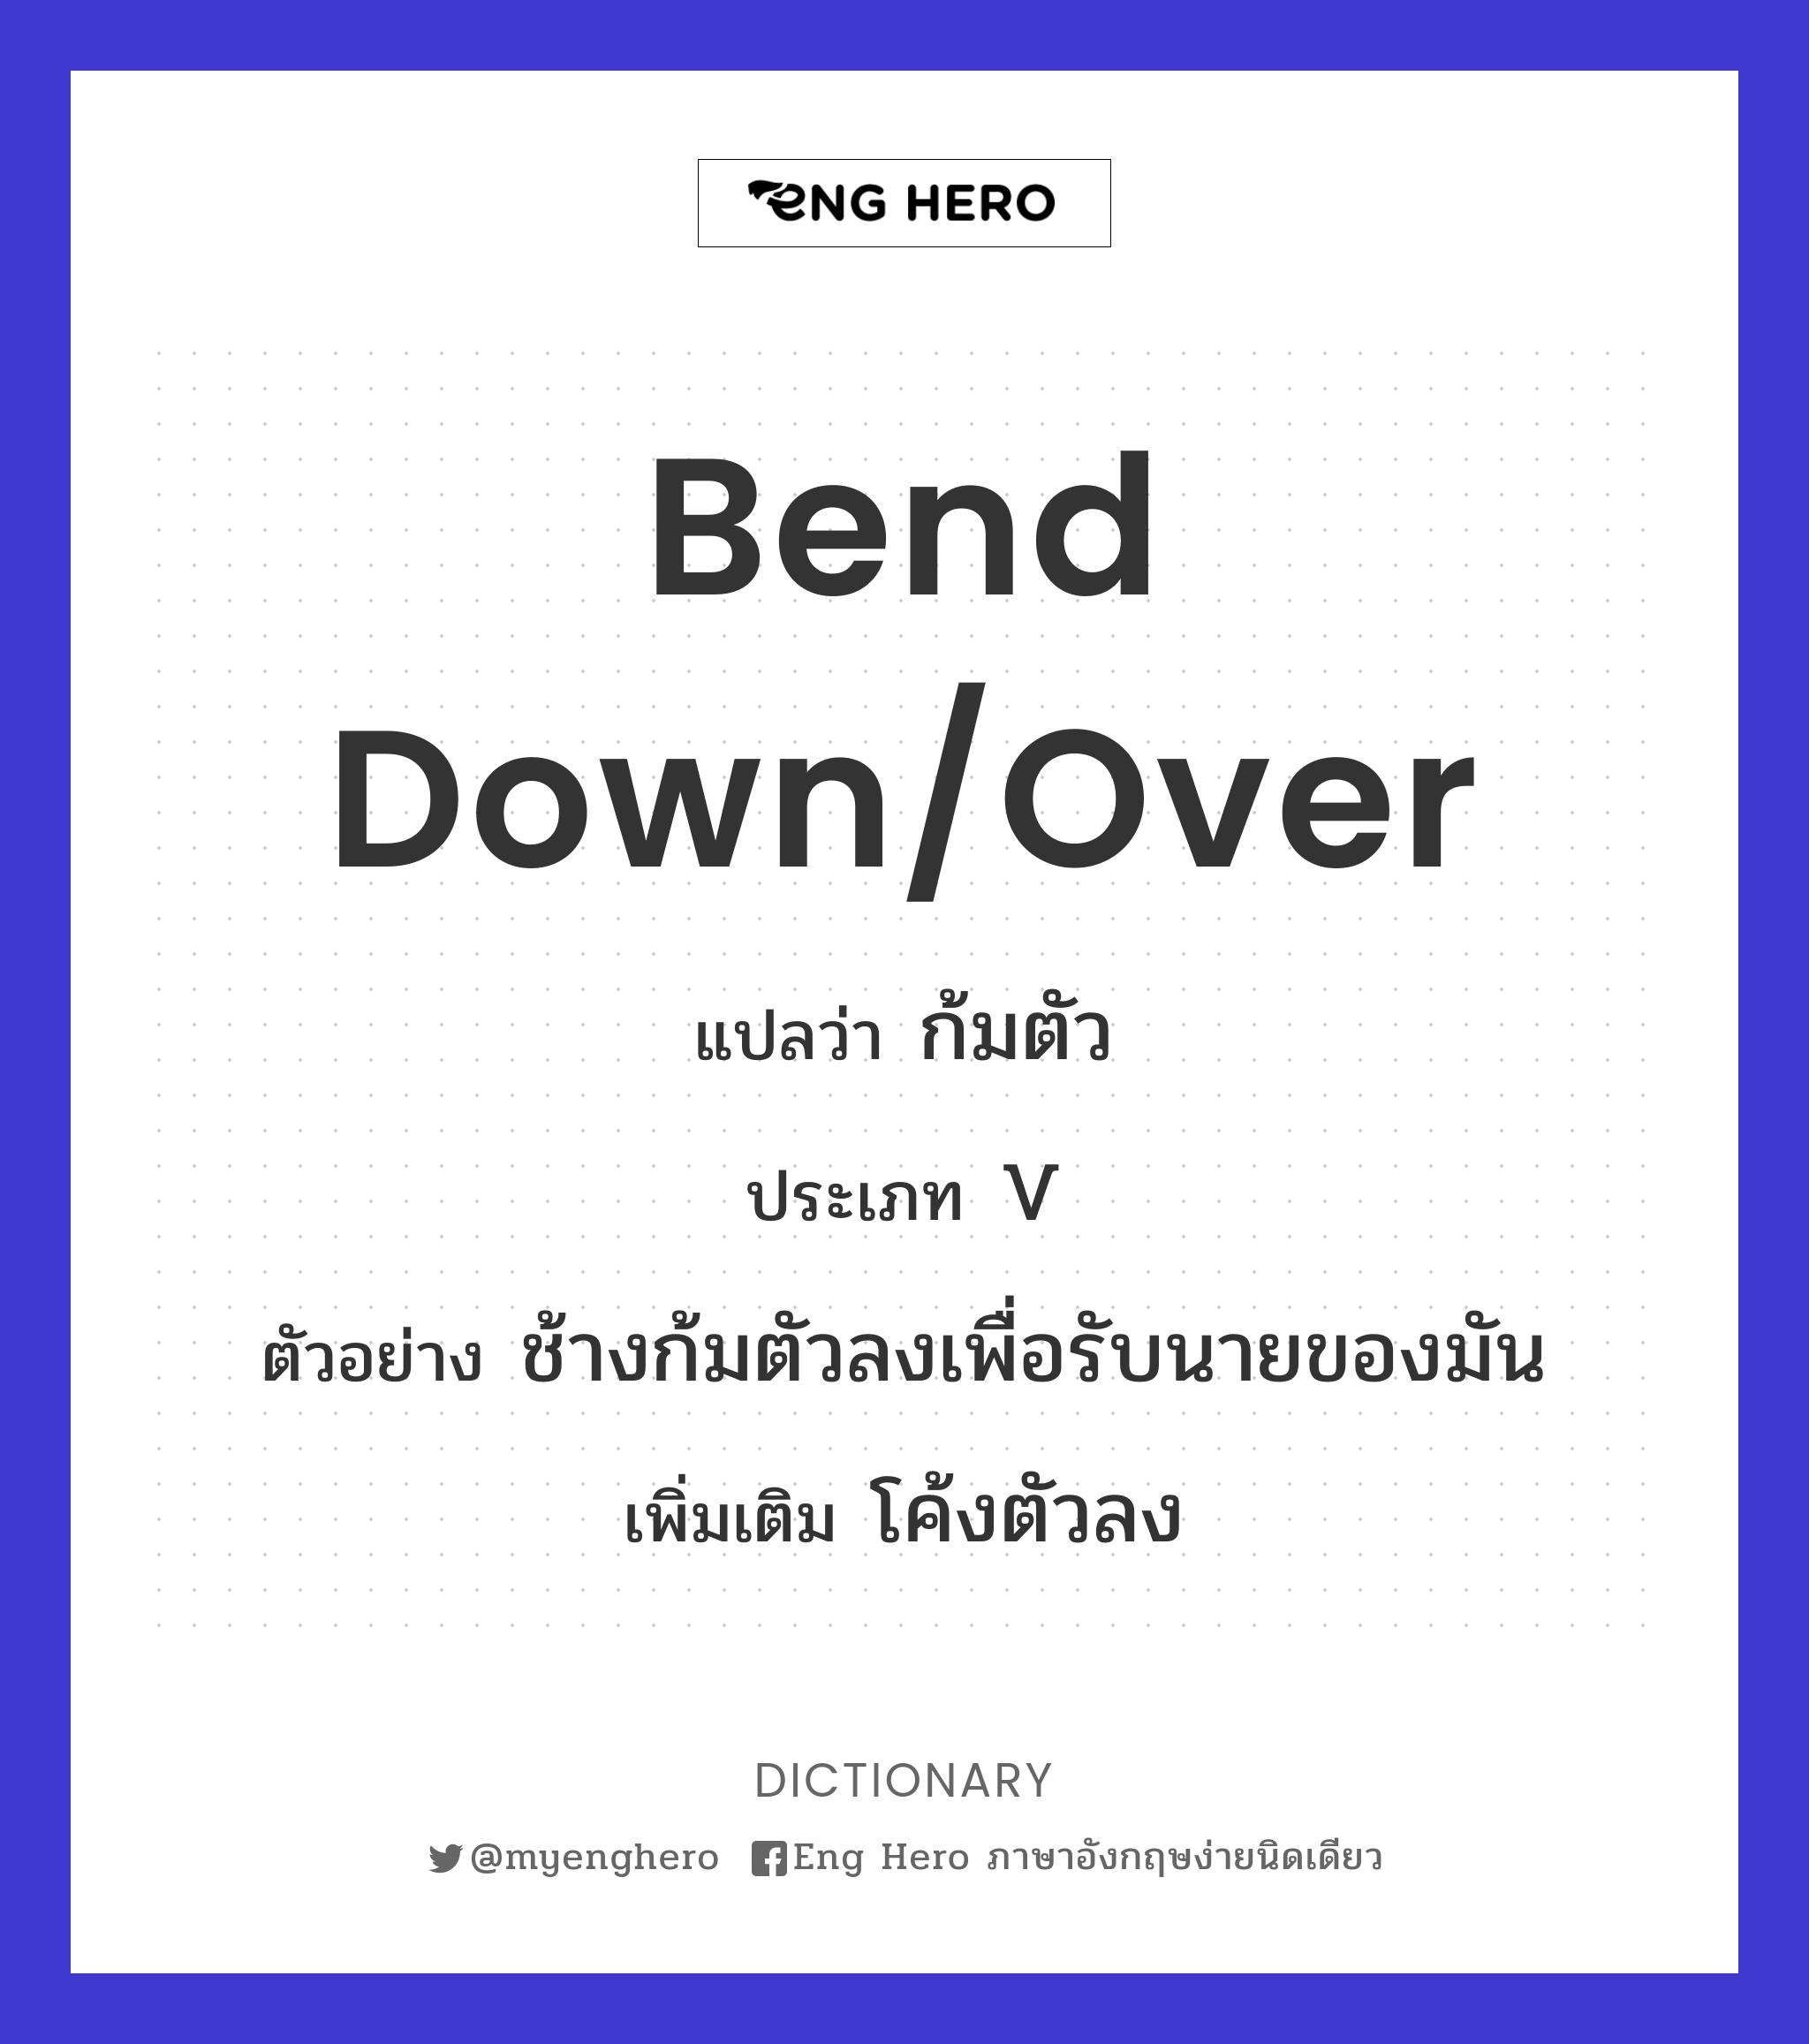 bend down/over